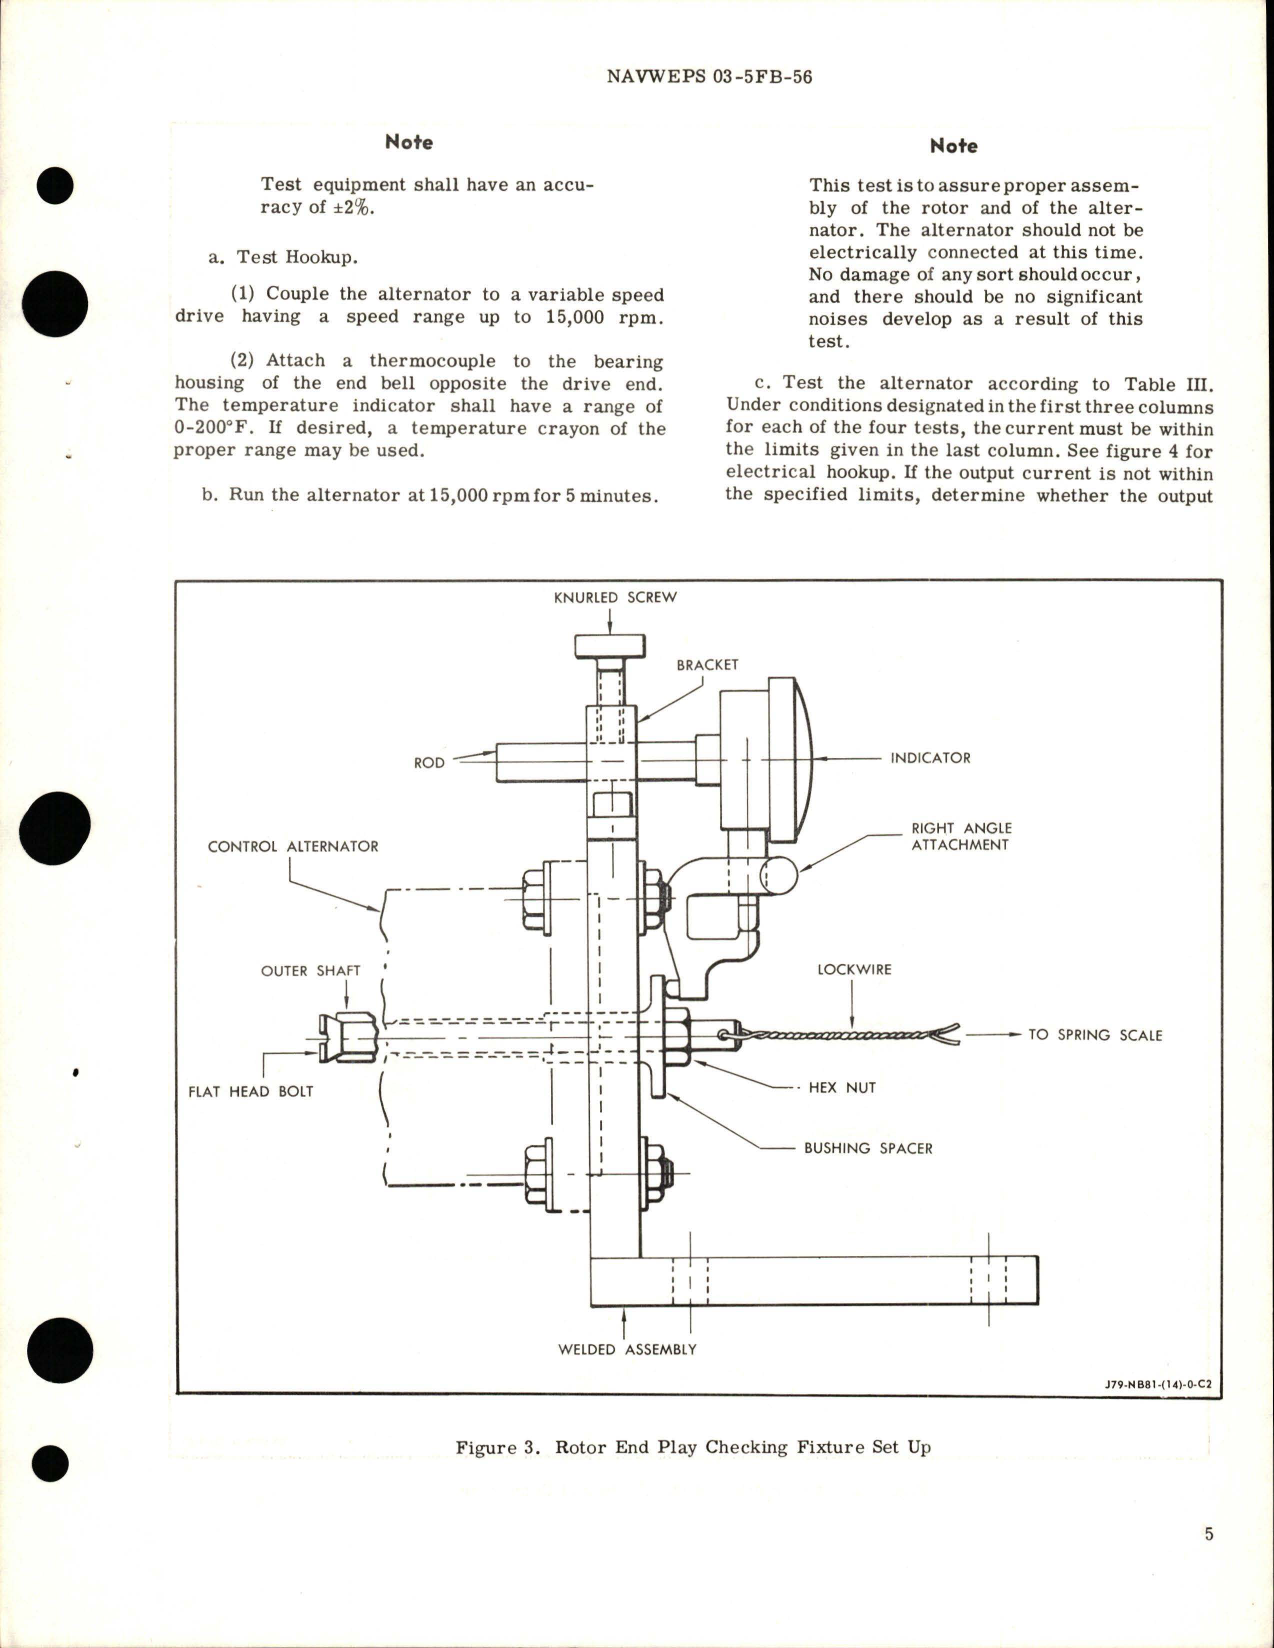 Sample page 7 from AirCorps Library document: Overhaul Instructions with Parts Breakdown for Control Alternator - Model 5ASB40NJ21